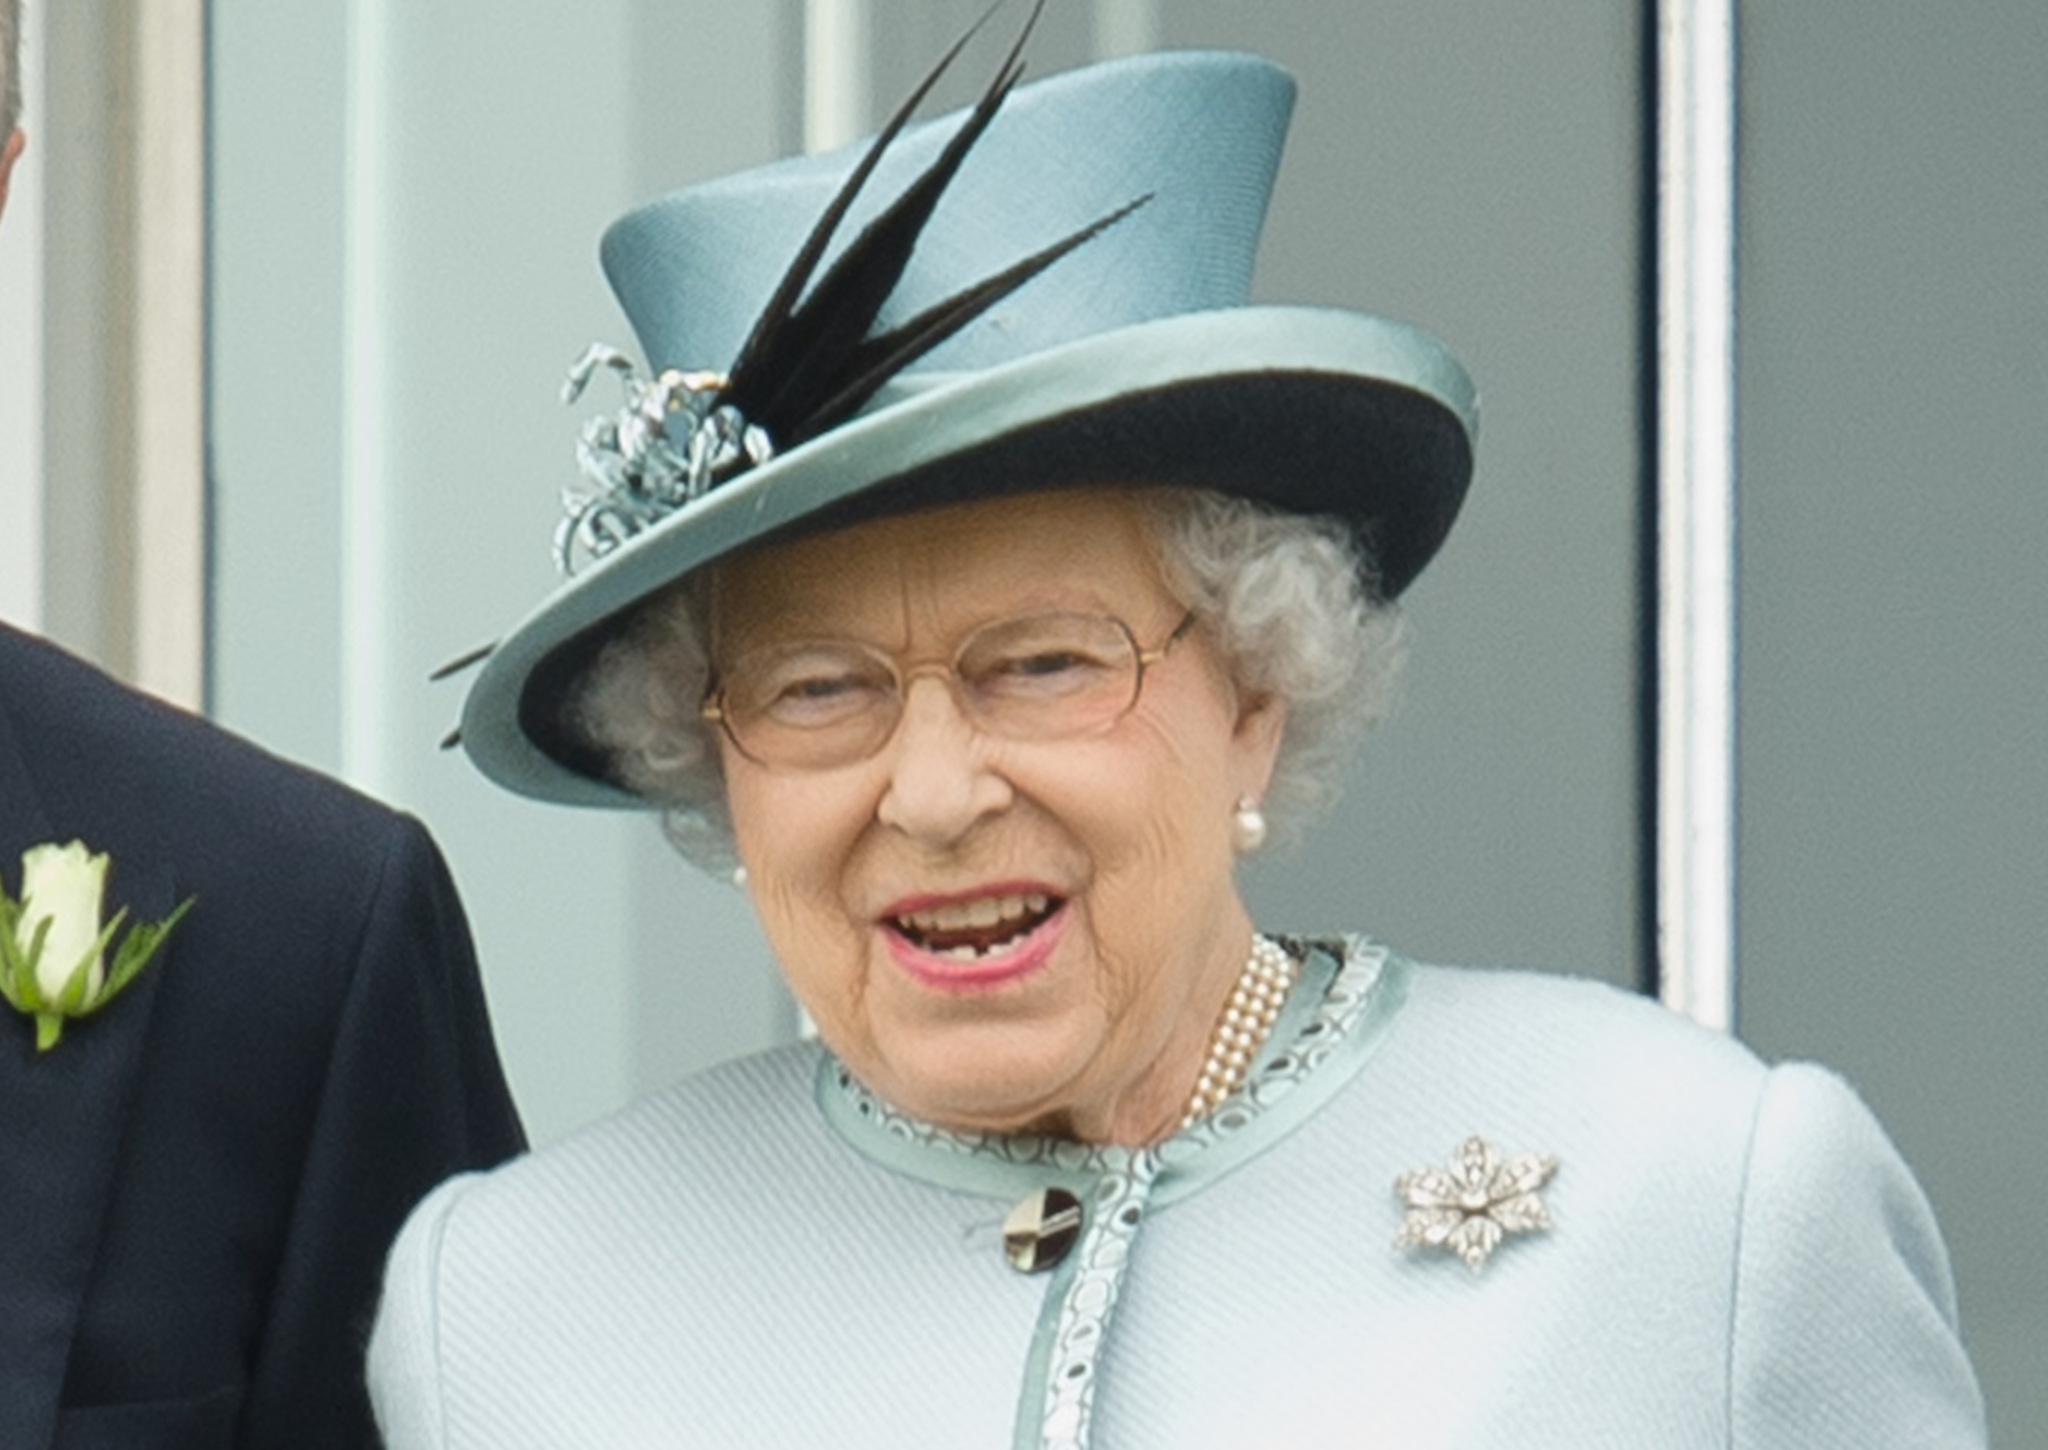 The Queen at Derby day during the Epsom Derby Festival, 2013